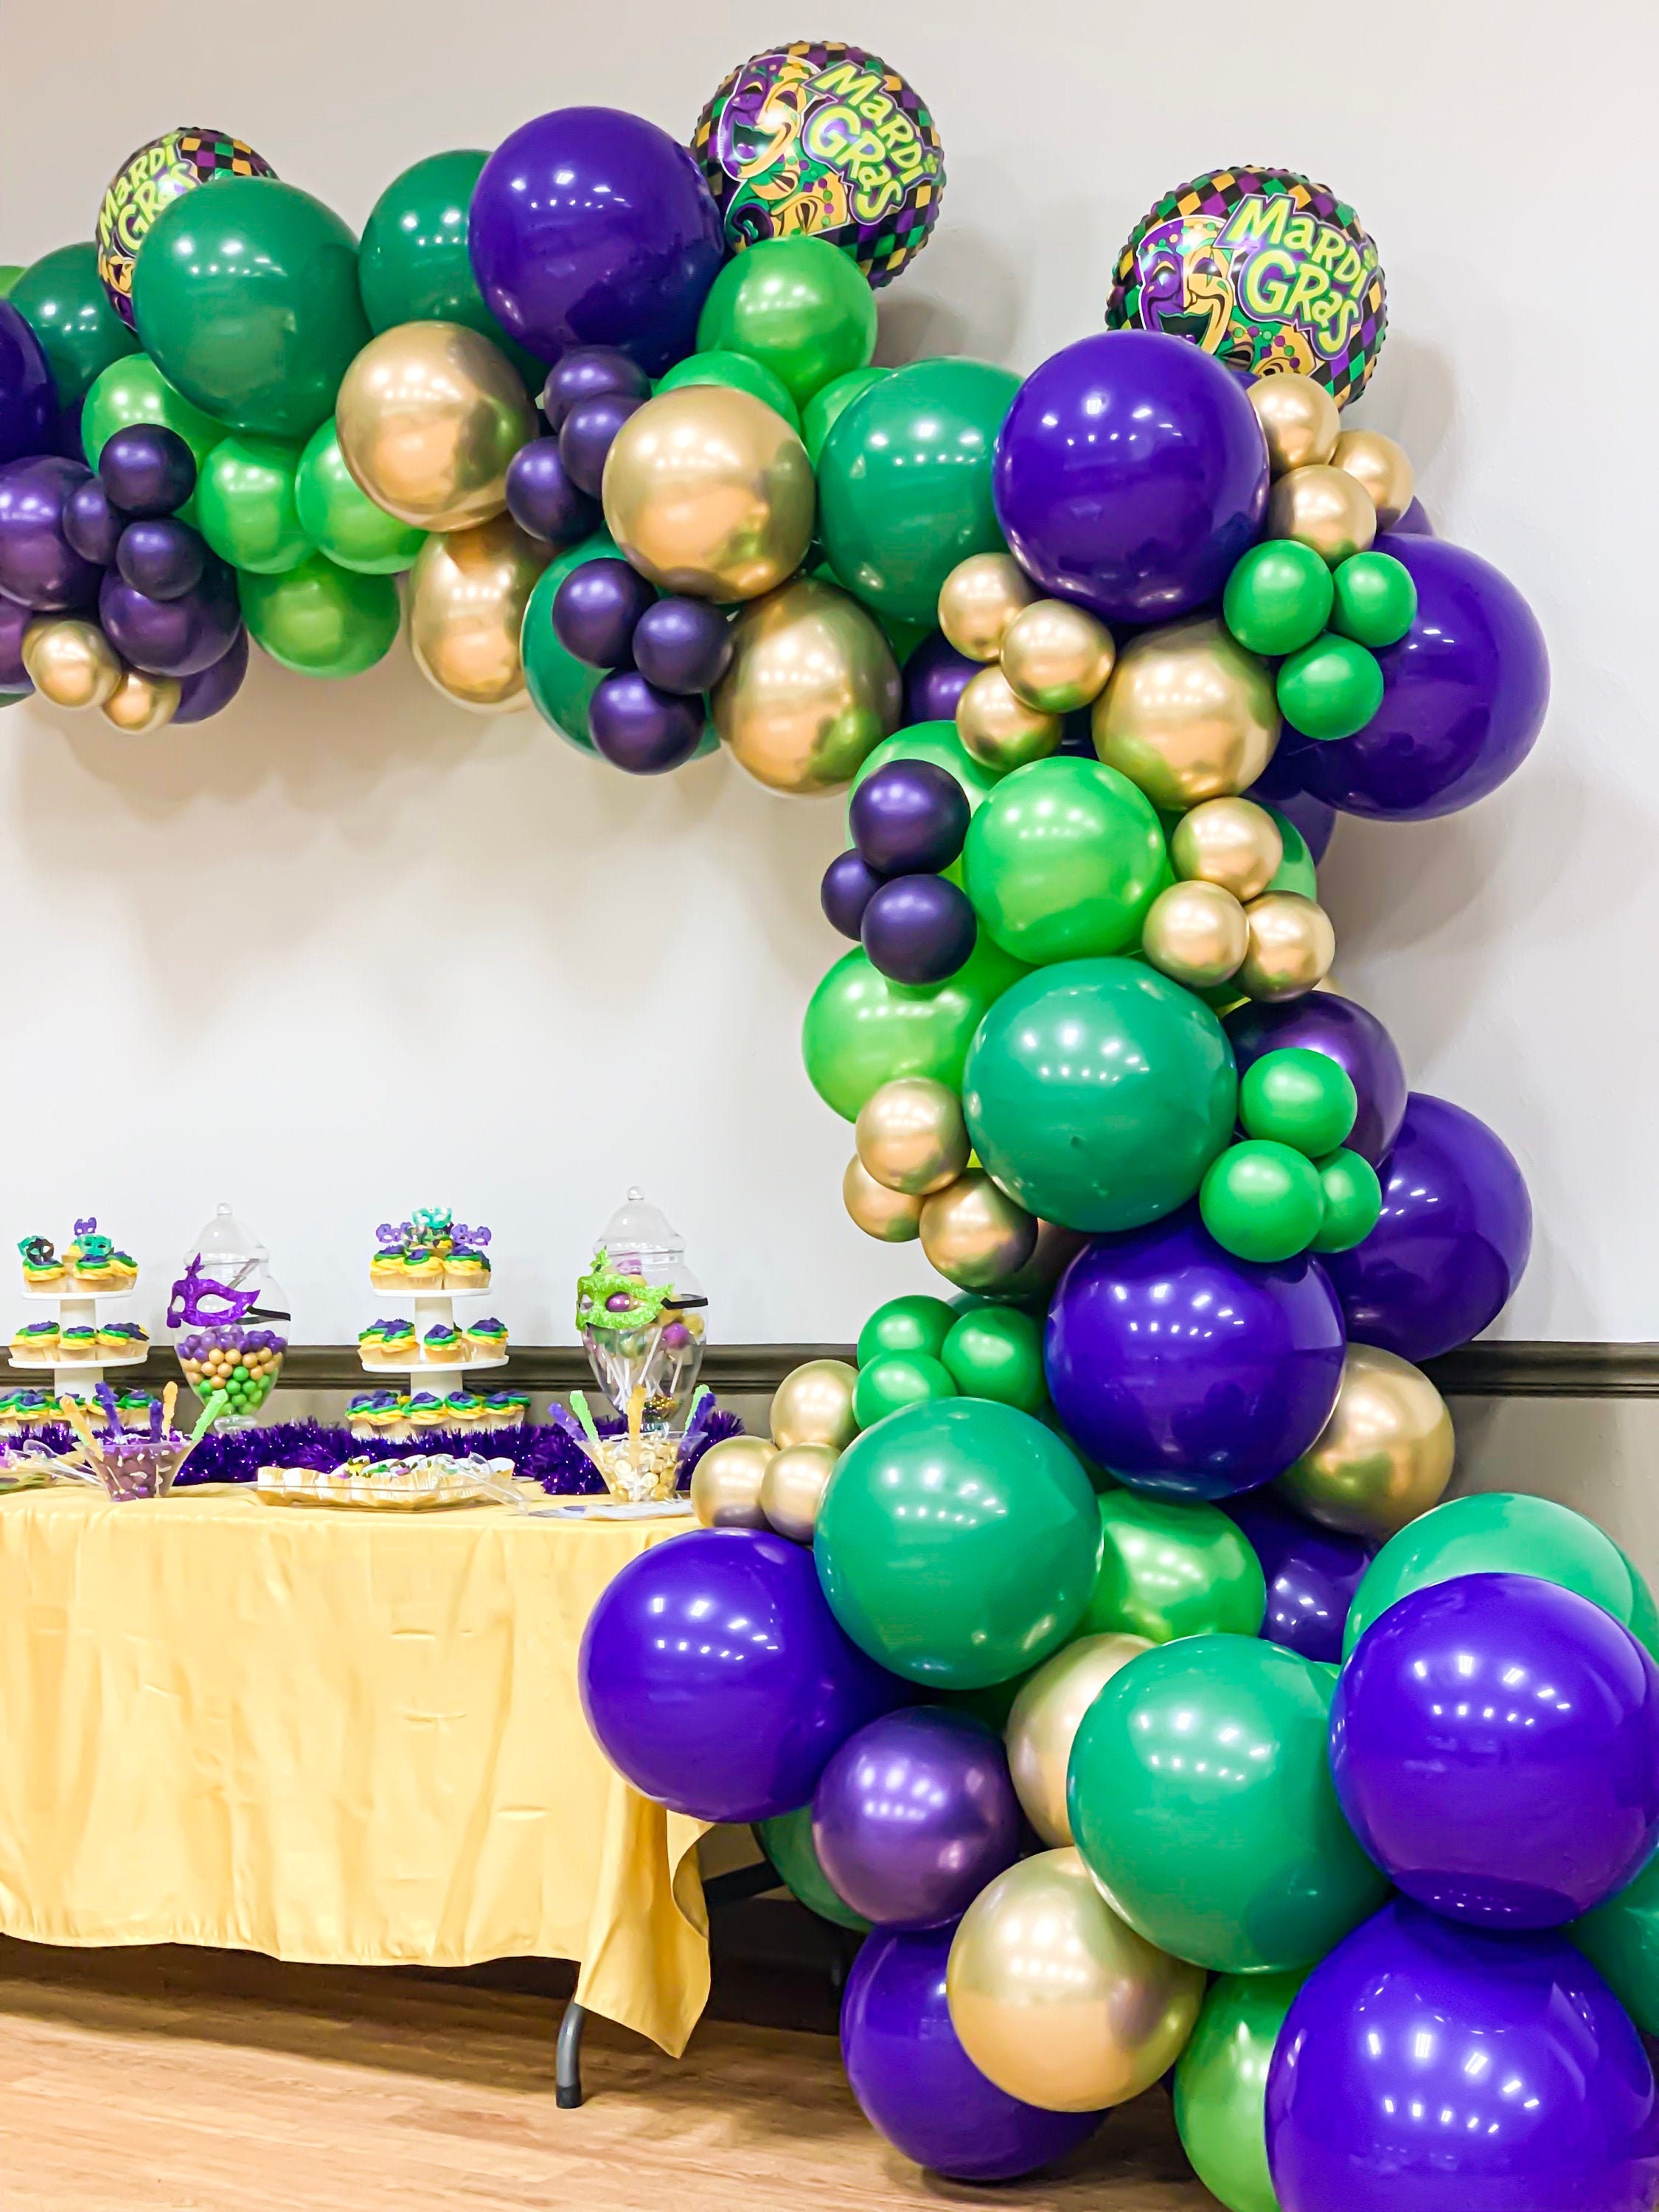 113 Pcs Mardi Gras Decorations Set Fat Tuesday, Tail Moon Balloons, Paper Confetti, Purple Green and Gold Balloon Garland Arch Kit for Birthday